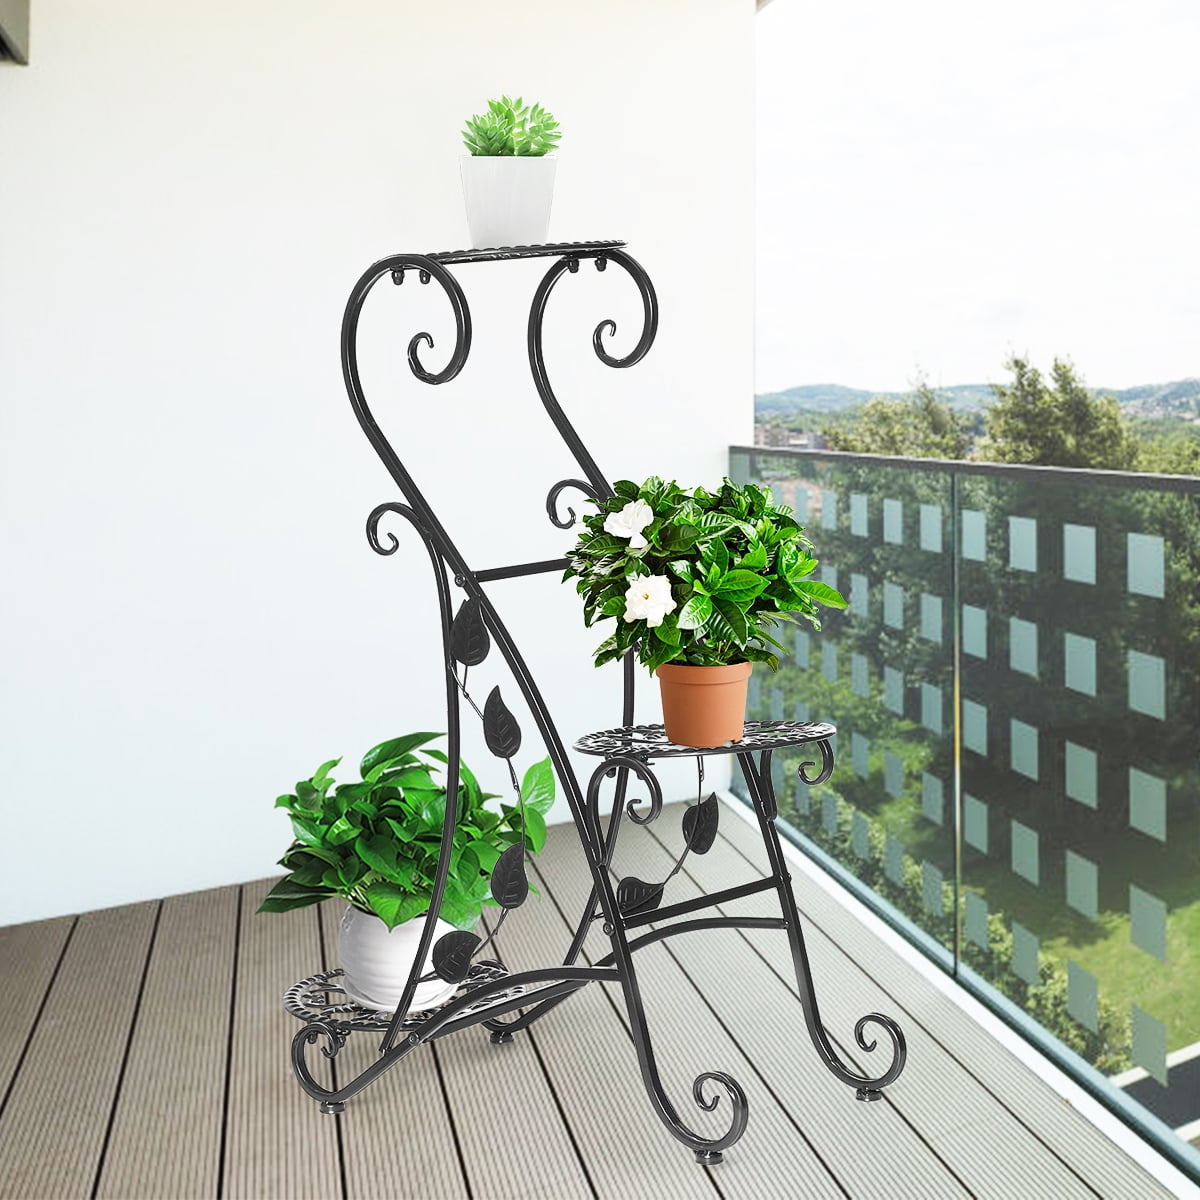 Details about   6-9 Tiered Strong Metal Flower Rack Pot Plant Stand Indoor Garden Yard Decor New 